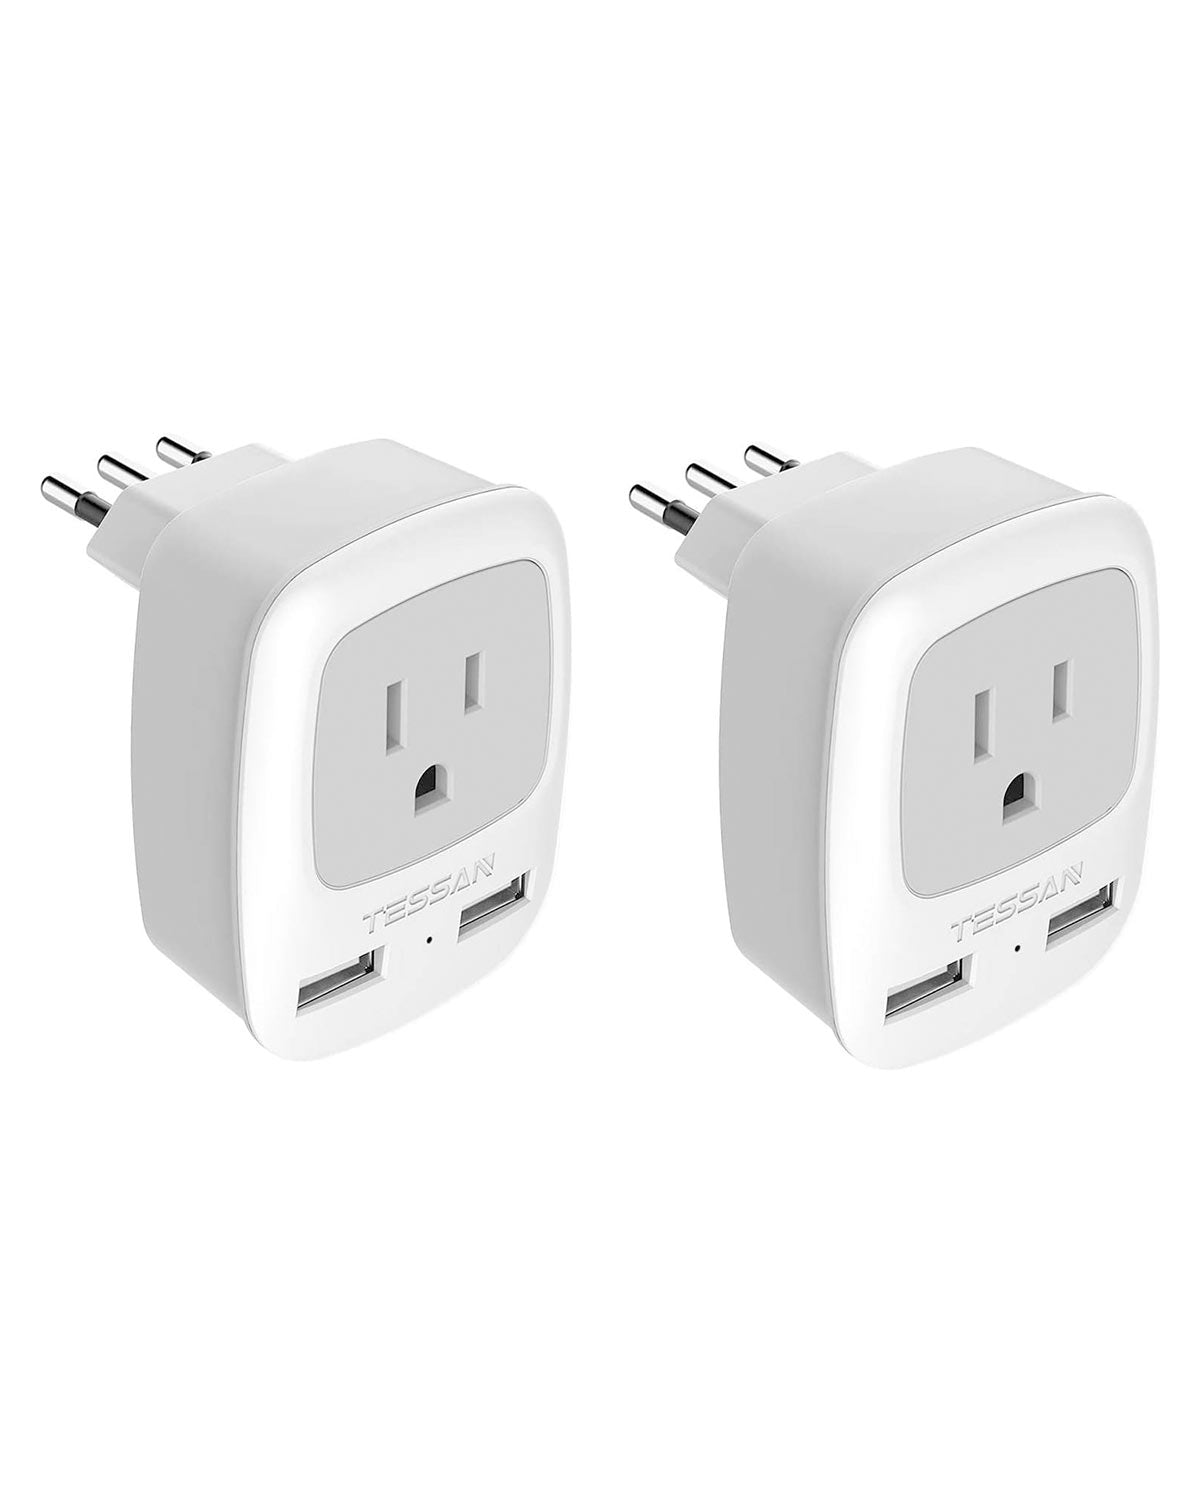 TESSAN Italy Travel Power Adapter, Grounded Plug Converter with Dual USB Charging Ports